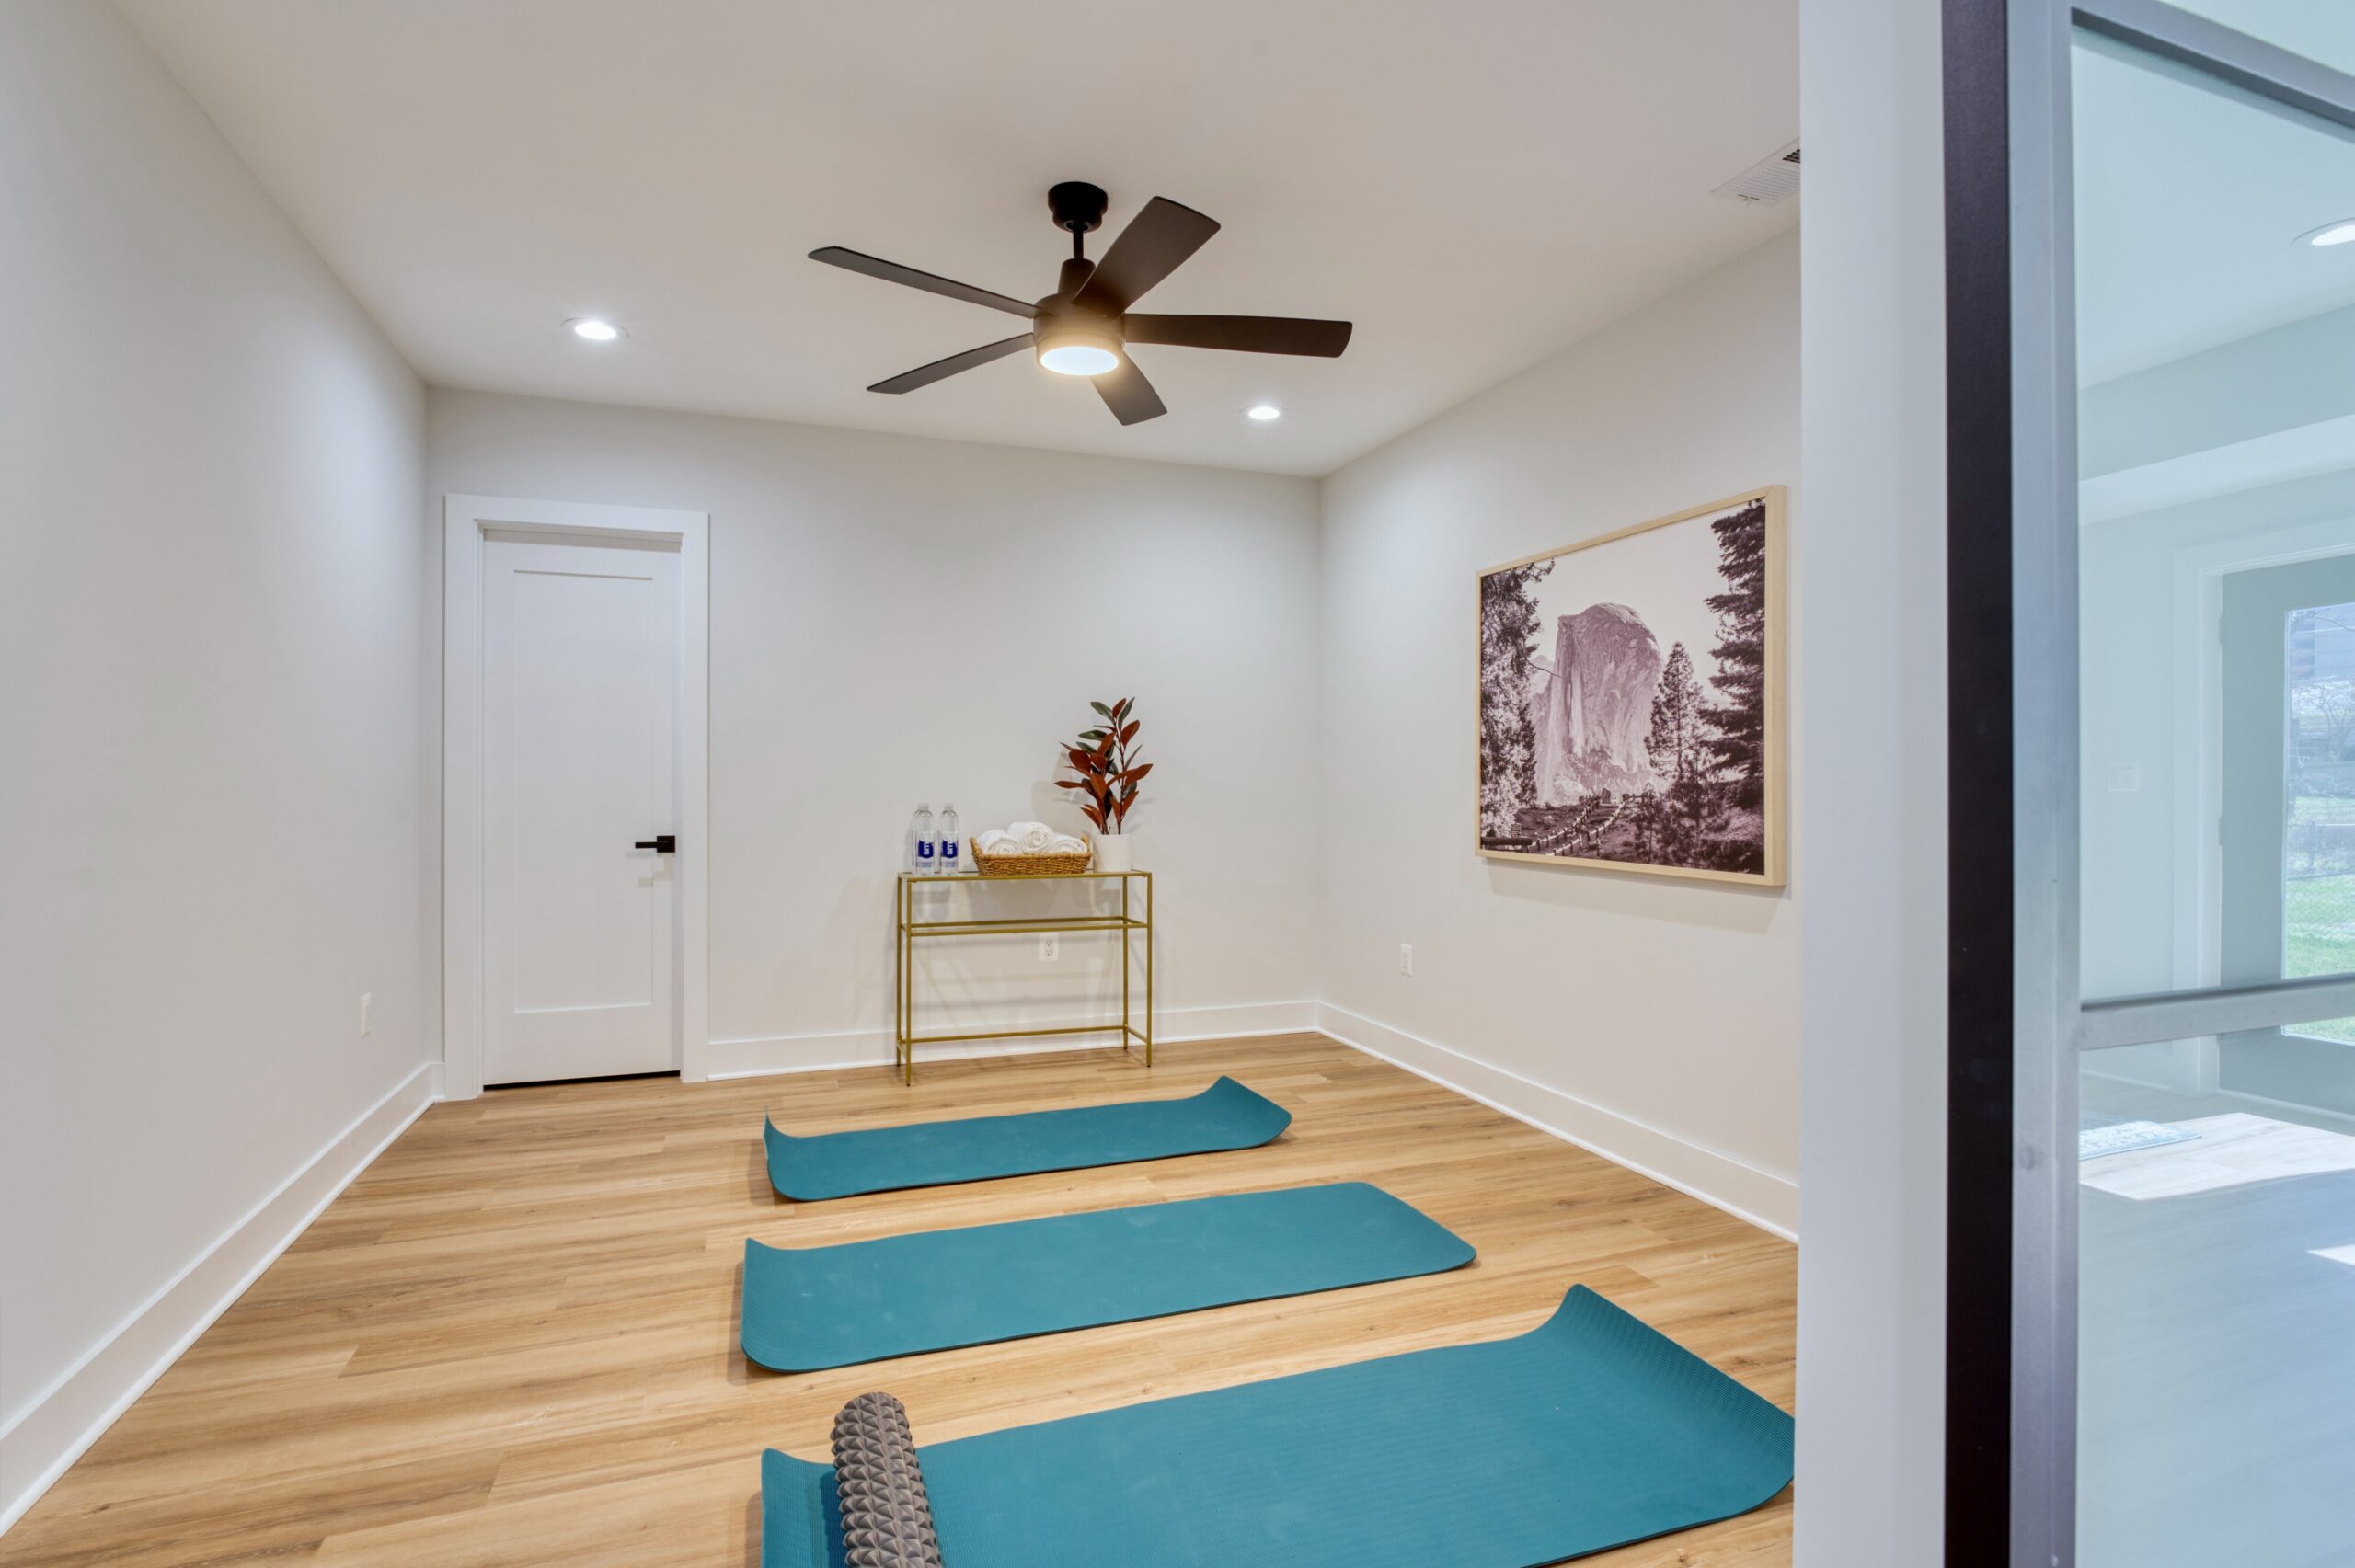 Professional interior photo of Custom New Home 1416 S Greenbrier St - showing the exercise room with LVP woodlike floors and yoga mats laid out and ceiling fan